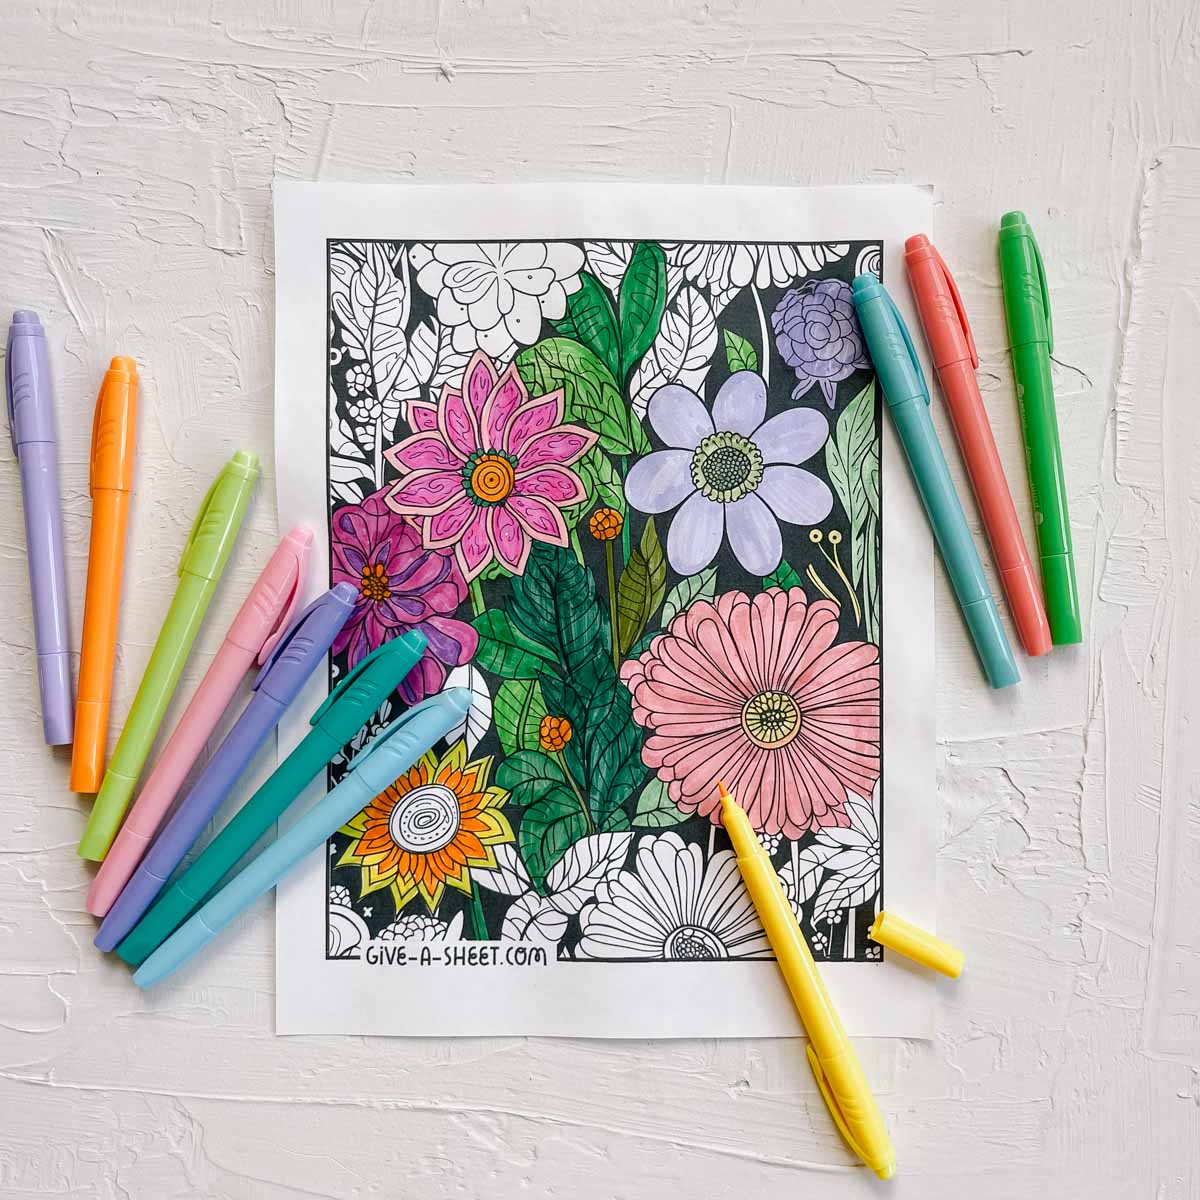 A detailed flower coloring sheet in progress of being colored.